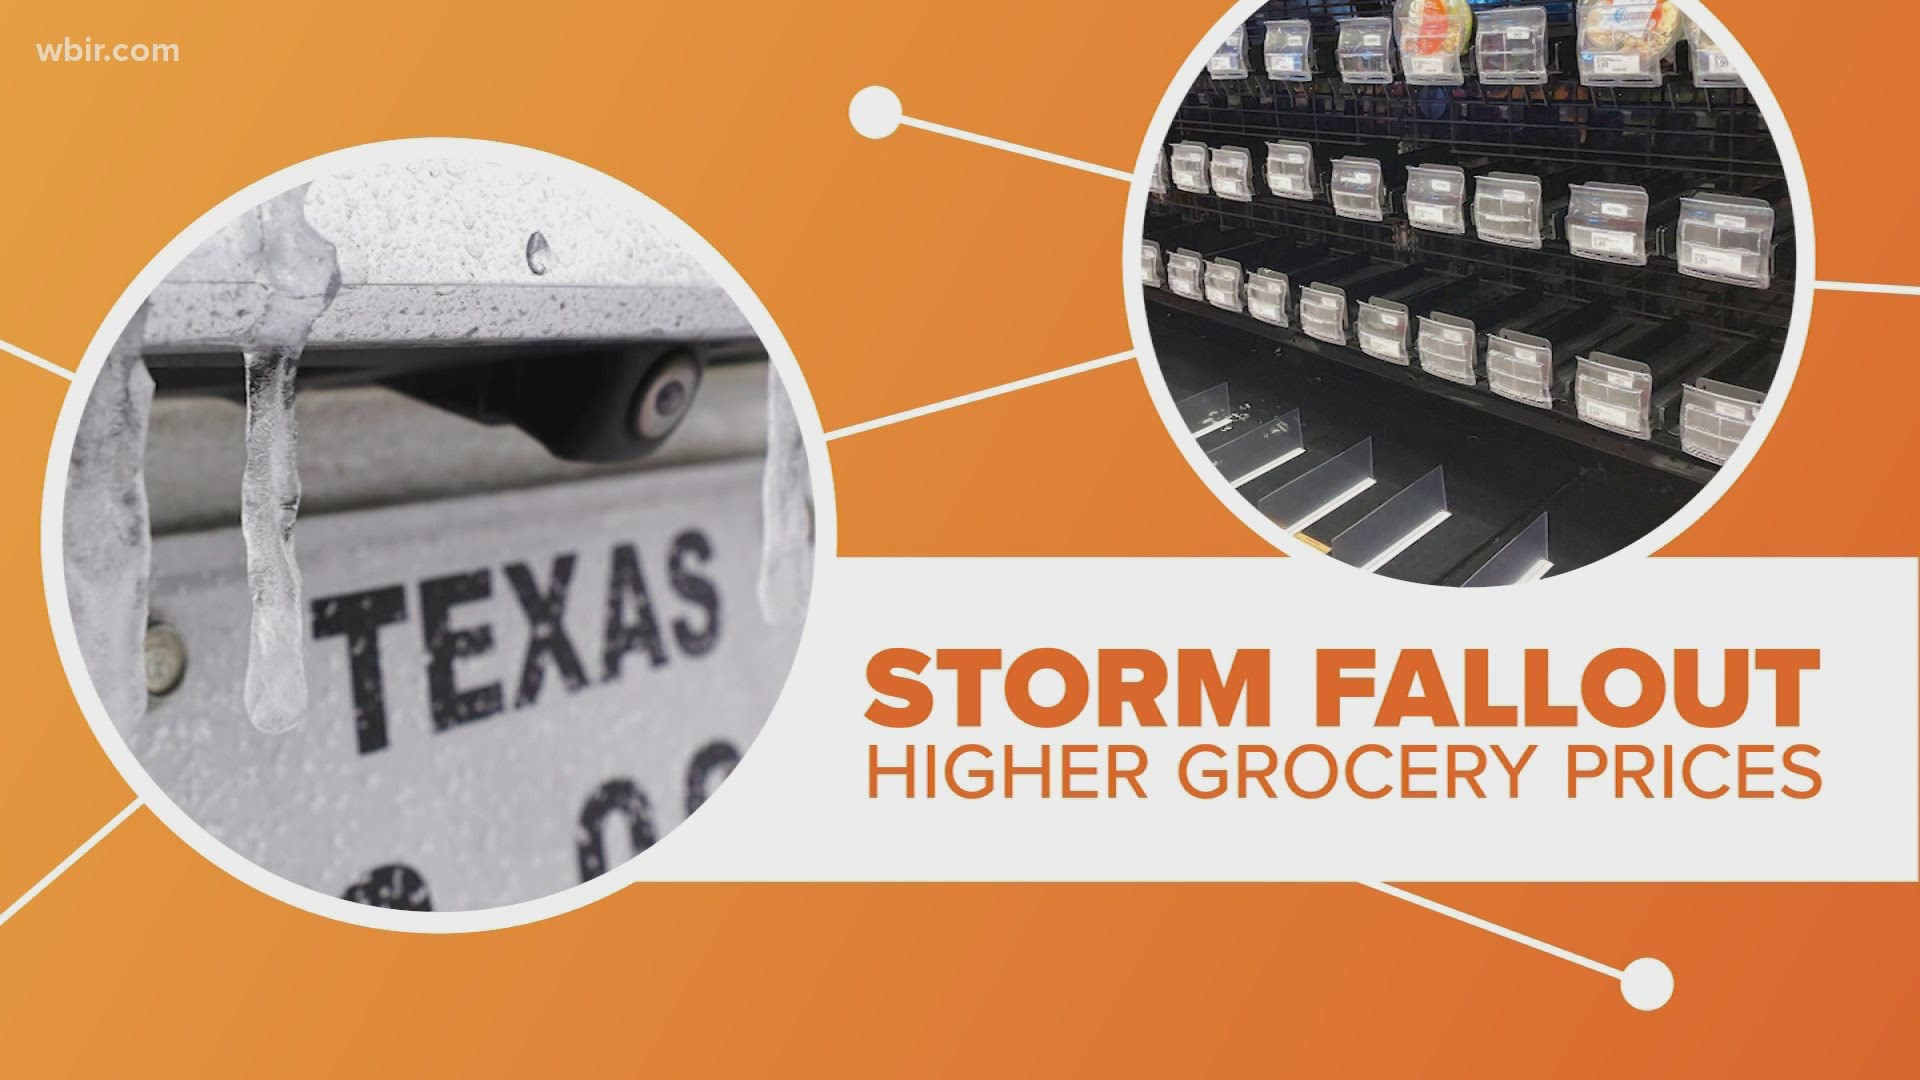 More fallout from that winter storm that hit Texas, it could raise grocery prices.